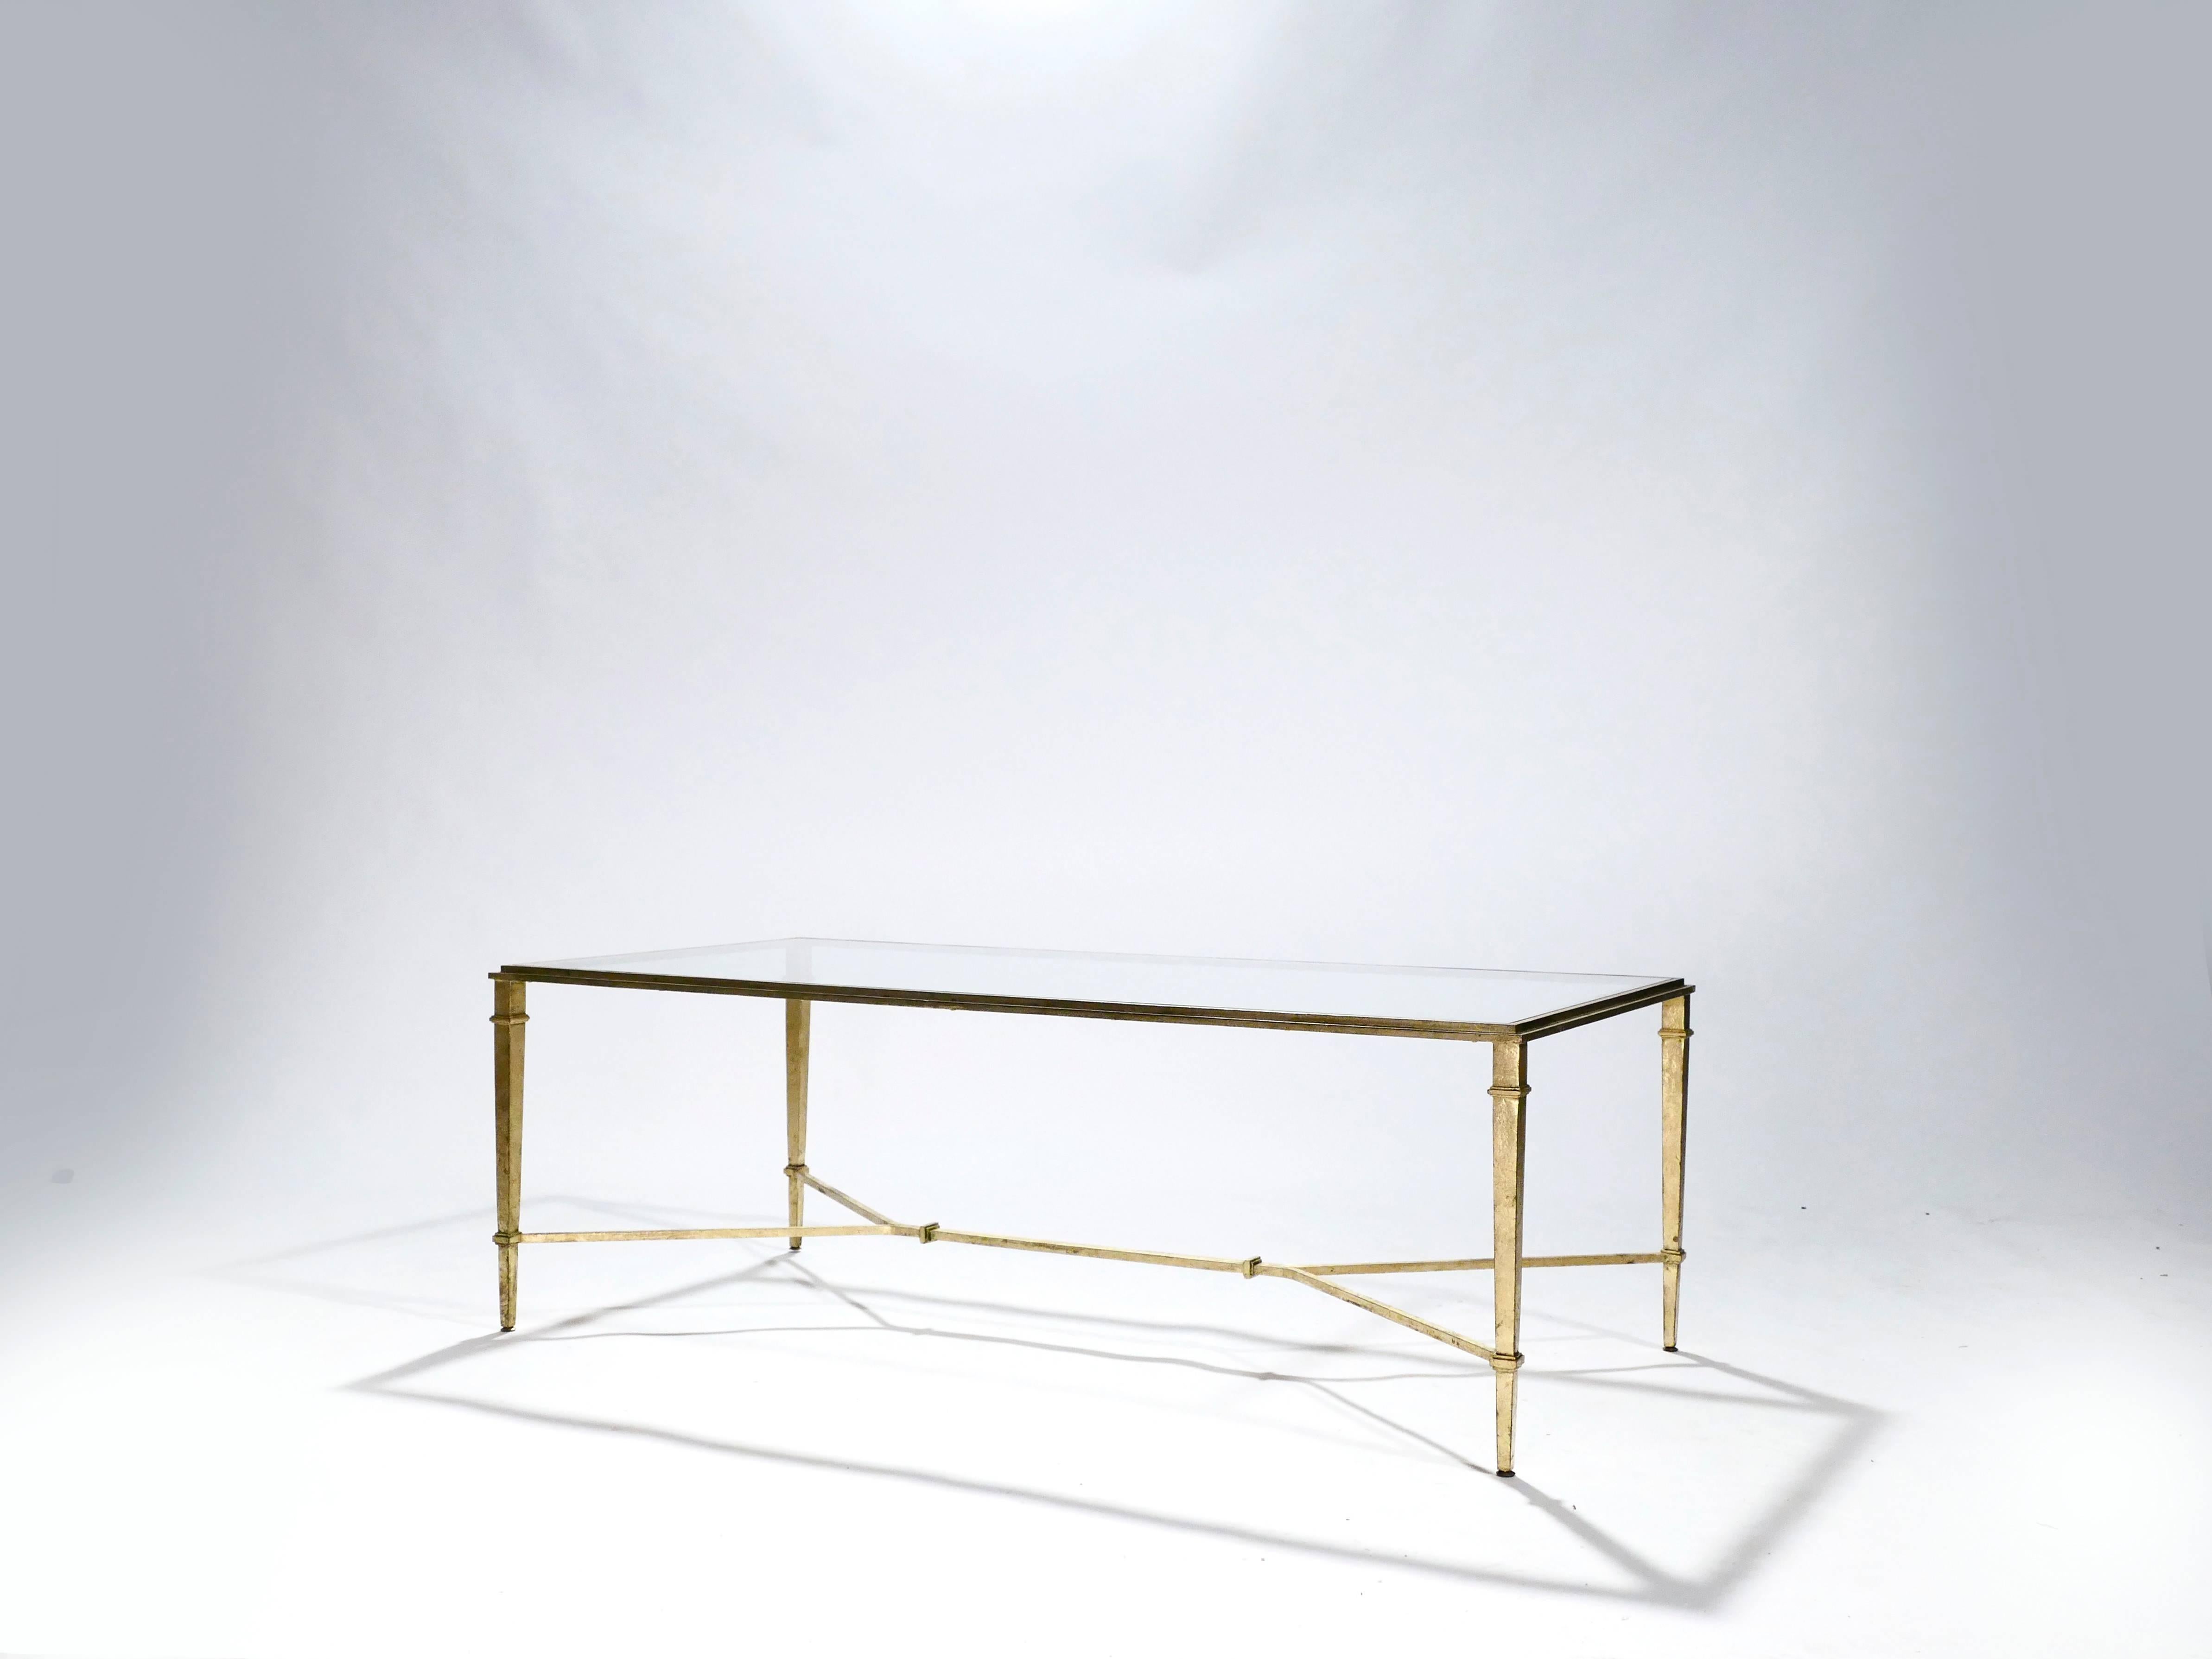 French Robert Thibier Gilt Wrought Iron Coffee Table, 1960s